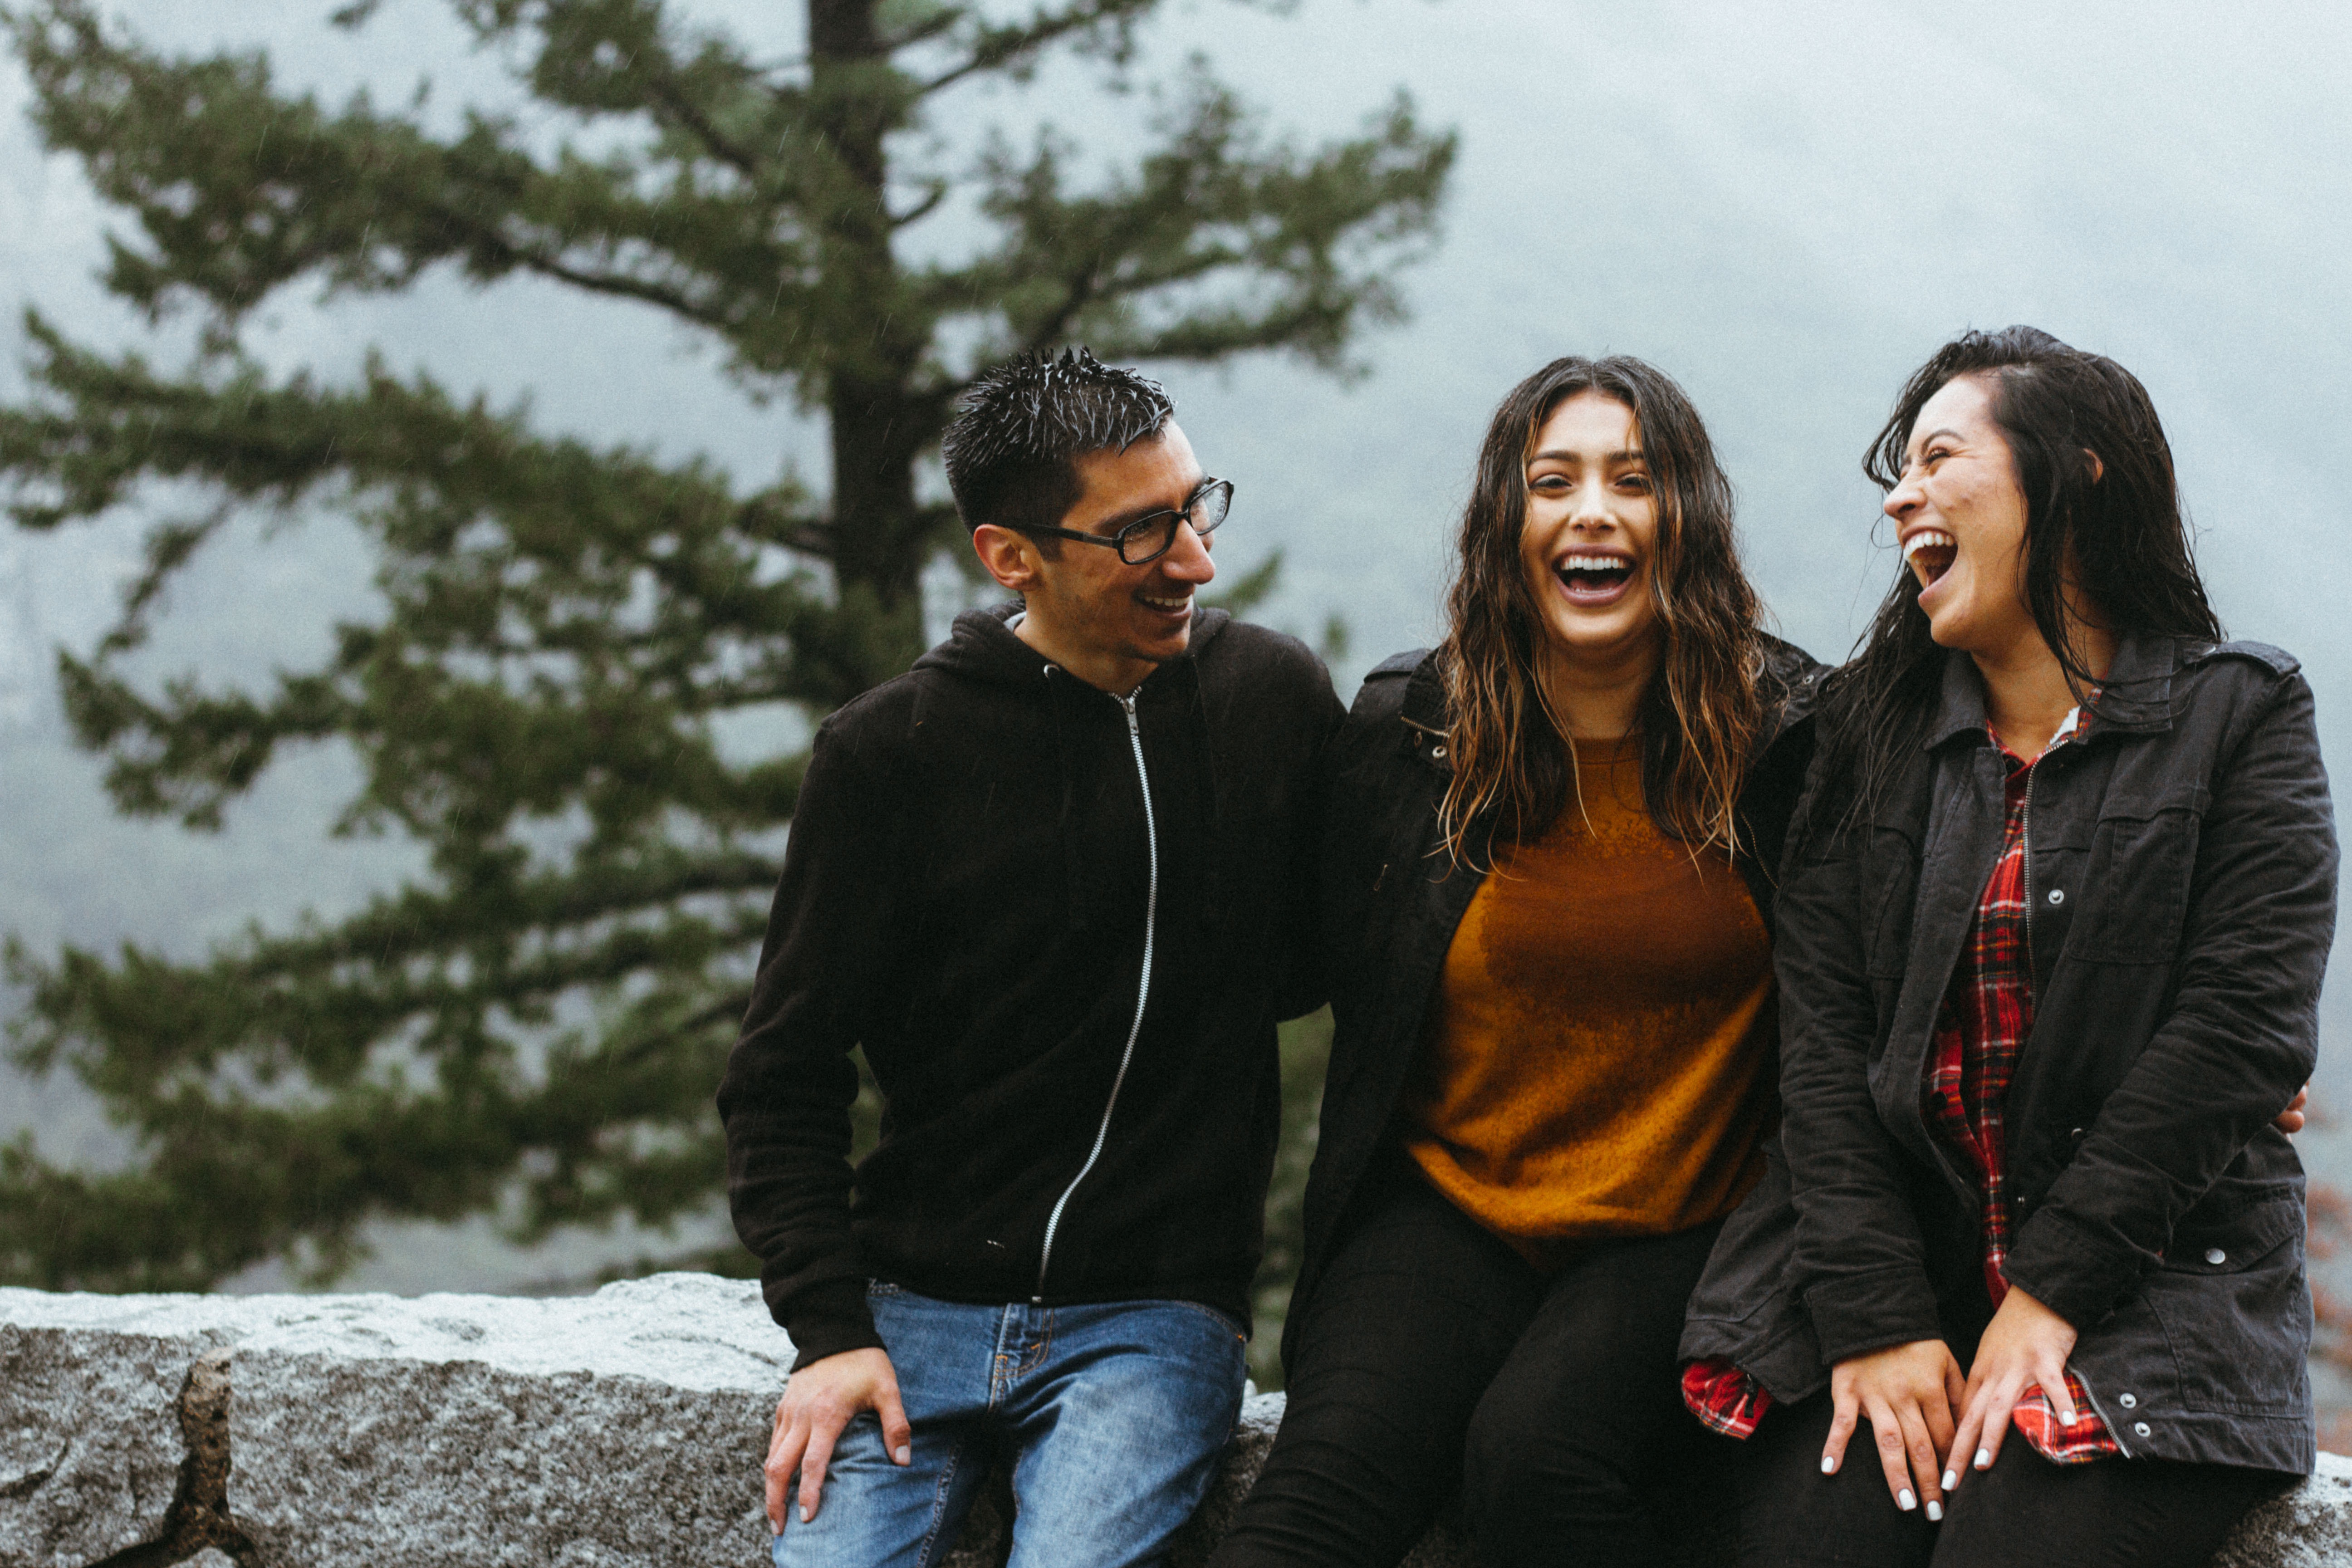 A man and two women sit on a stone wall and they are laughing.